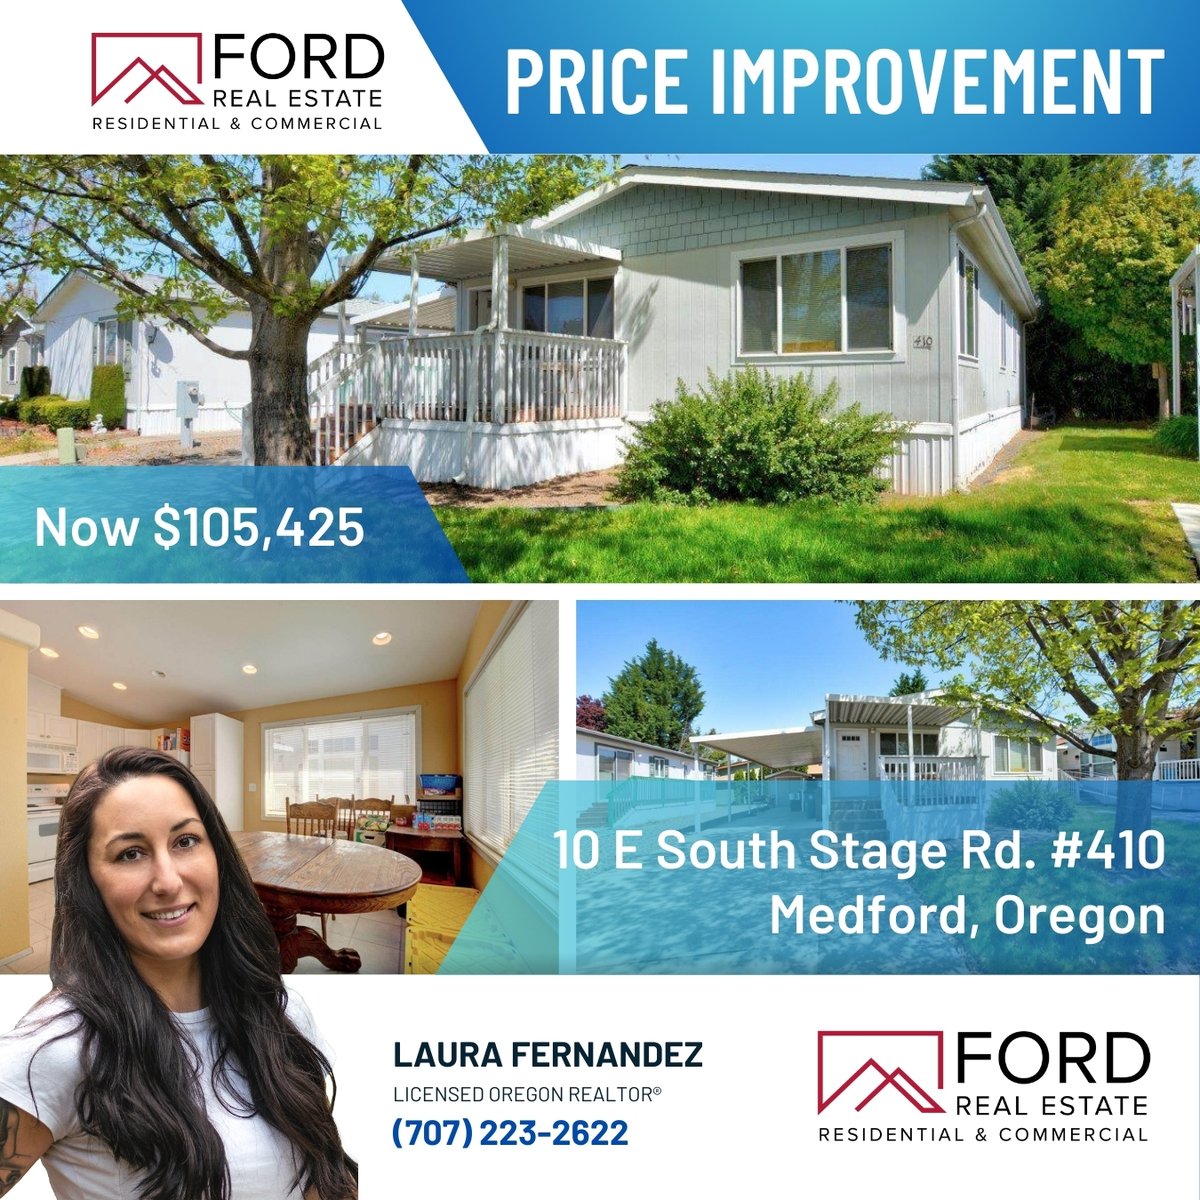 $10k price reduction for 10 E South Stage Rd #410, Medford, OR! Check out Laura Fernandez' full listing here: zurl.co/pjBo #PriceReduction #RealEstate